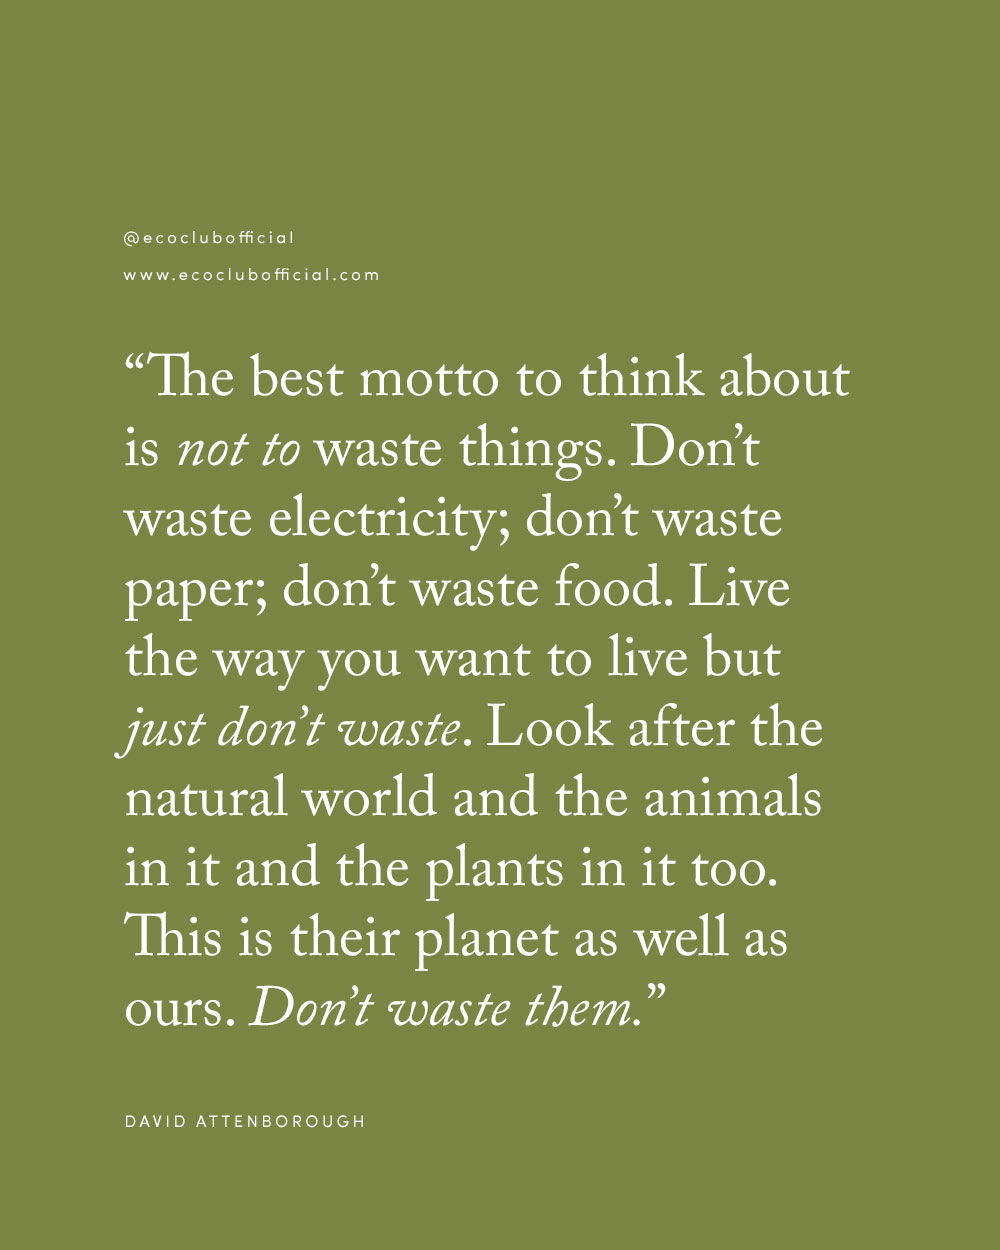 Quotes on how to be eco friendly - zero waste quotes